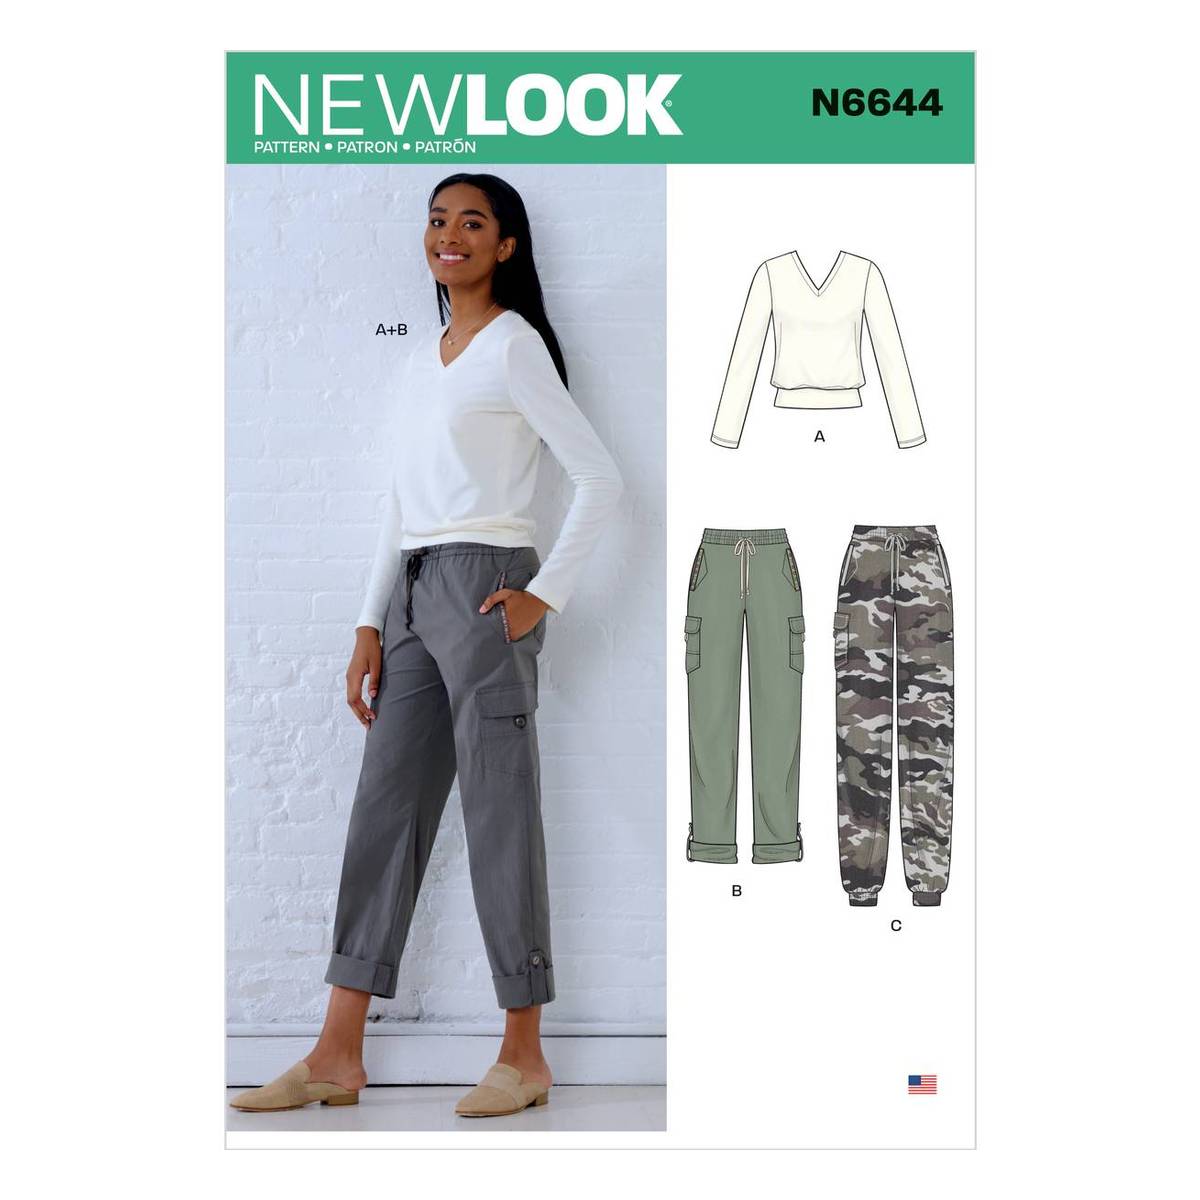 Smart Look Relaxed Trouser | NIC+ZOE